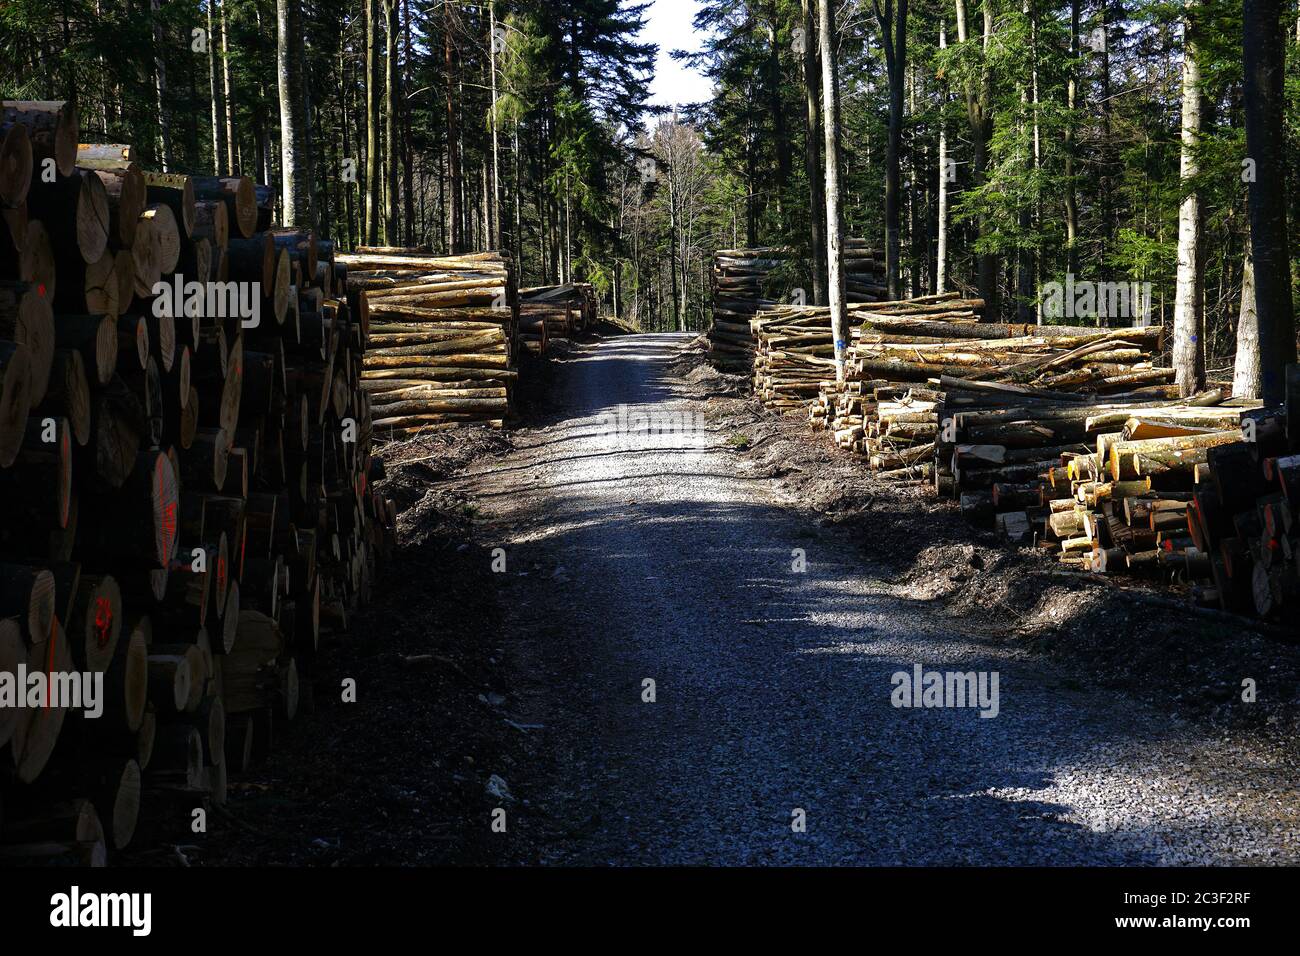 Logging, forestry, woodcutting Stock Photo